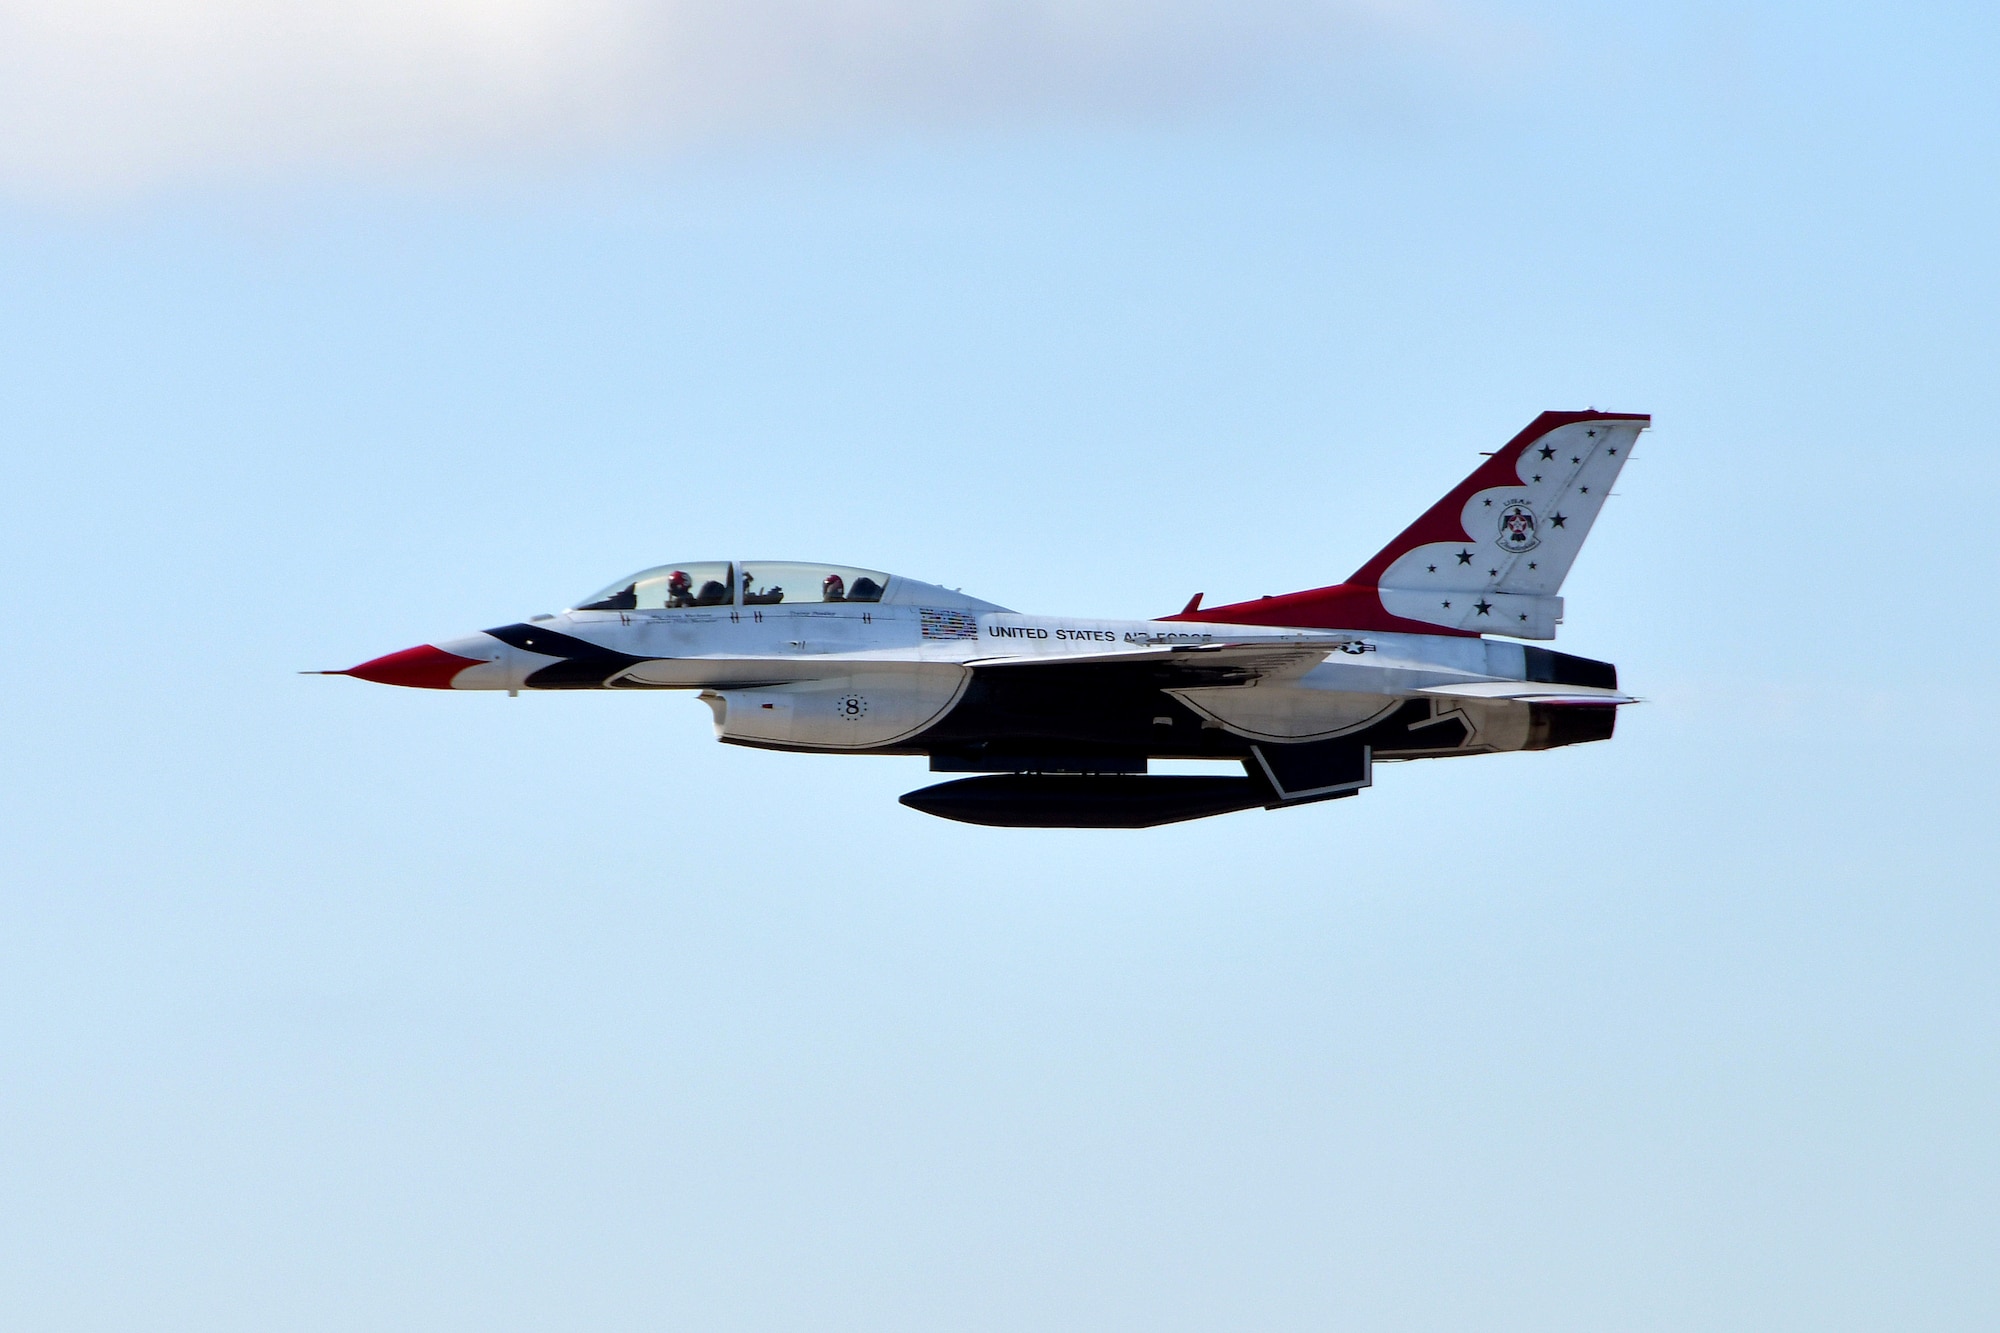 A U.S. Air Force Thunderbirds F-16 Fighting Falcon flies over Dobbins Air Reserve Base, Ga. on Oct. 11, 2019. Flying in the backseat was Tracey Pendley, an Atlanta Public Schools fourth grade teacher, who flew with the Thunderbirds under the Hometown Hero program. (U.S. Air Force photo/Airman Kendra A. Ransum)